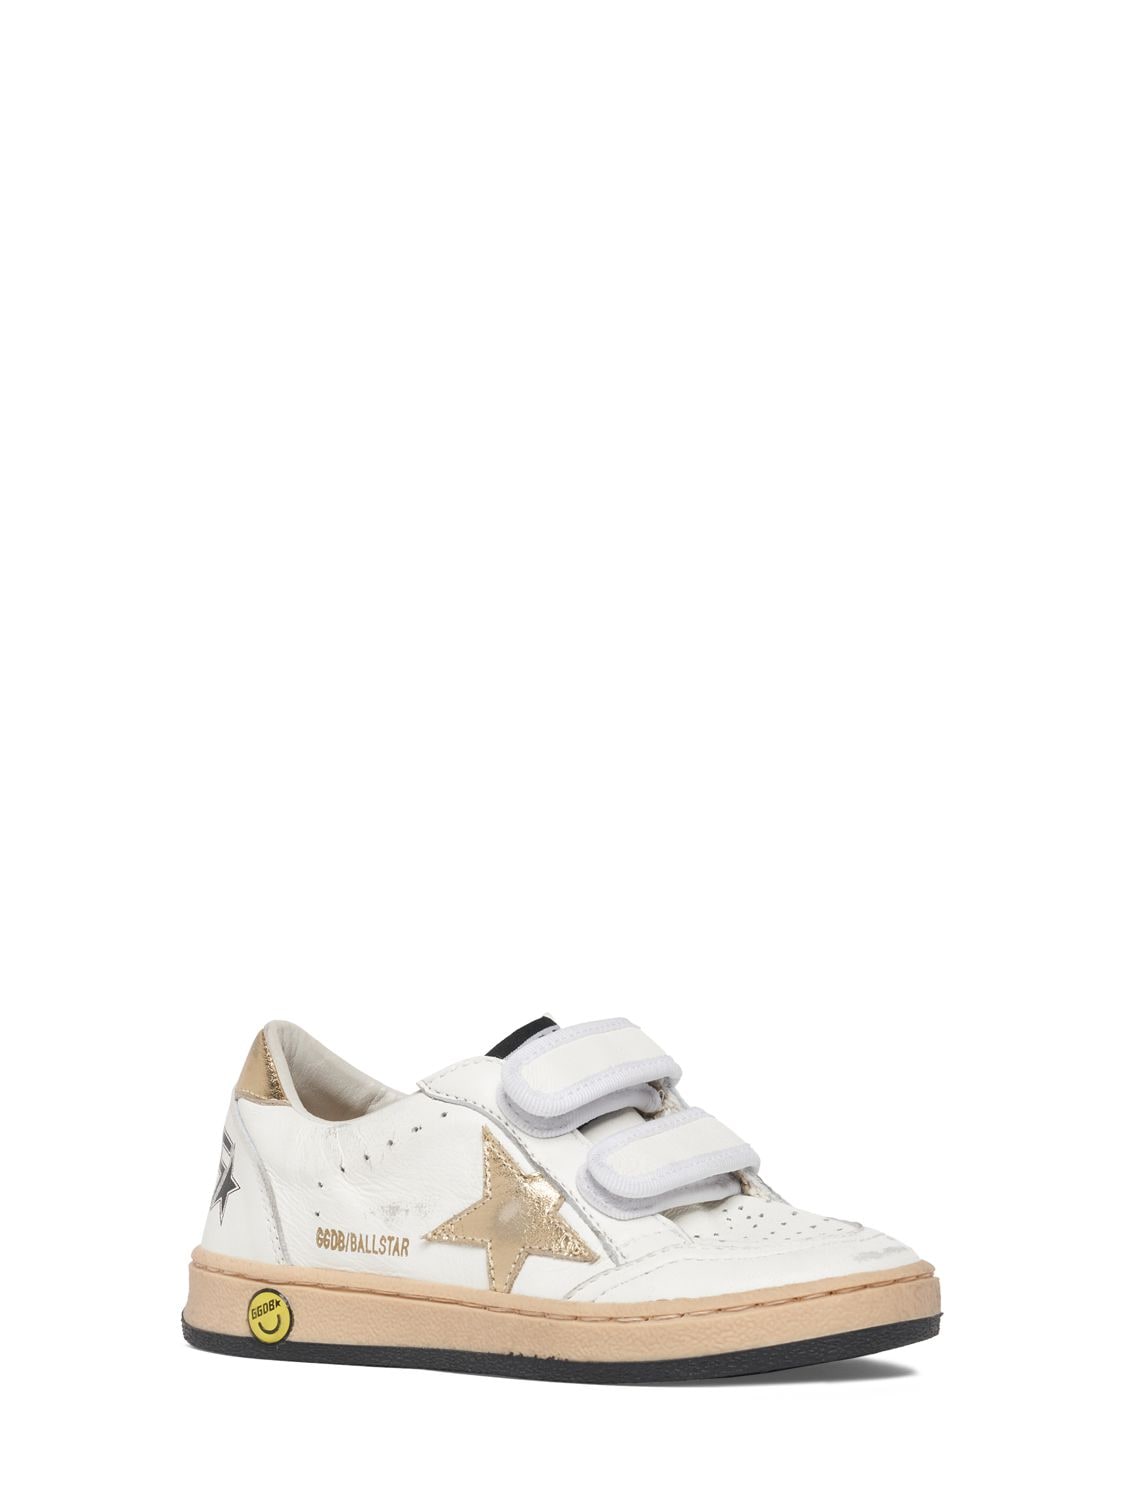 Shop Golden Goose Ballstar Leather Strap Sneakers In White,gold